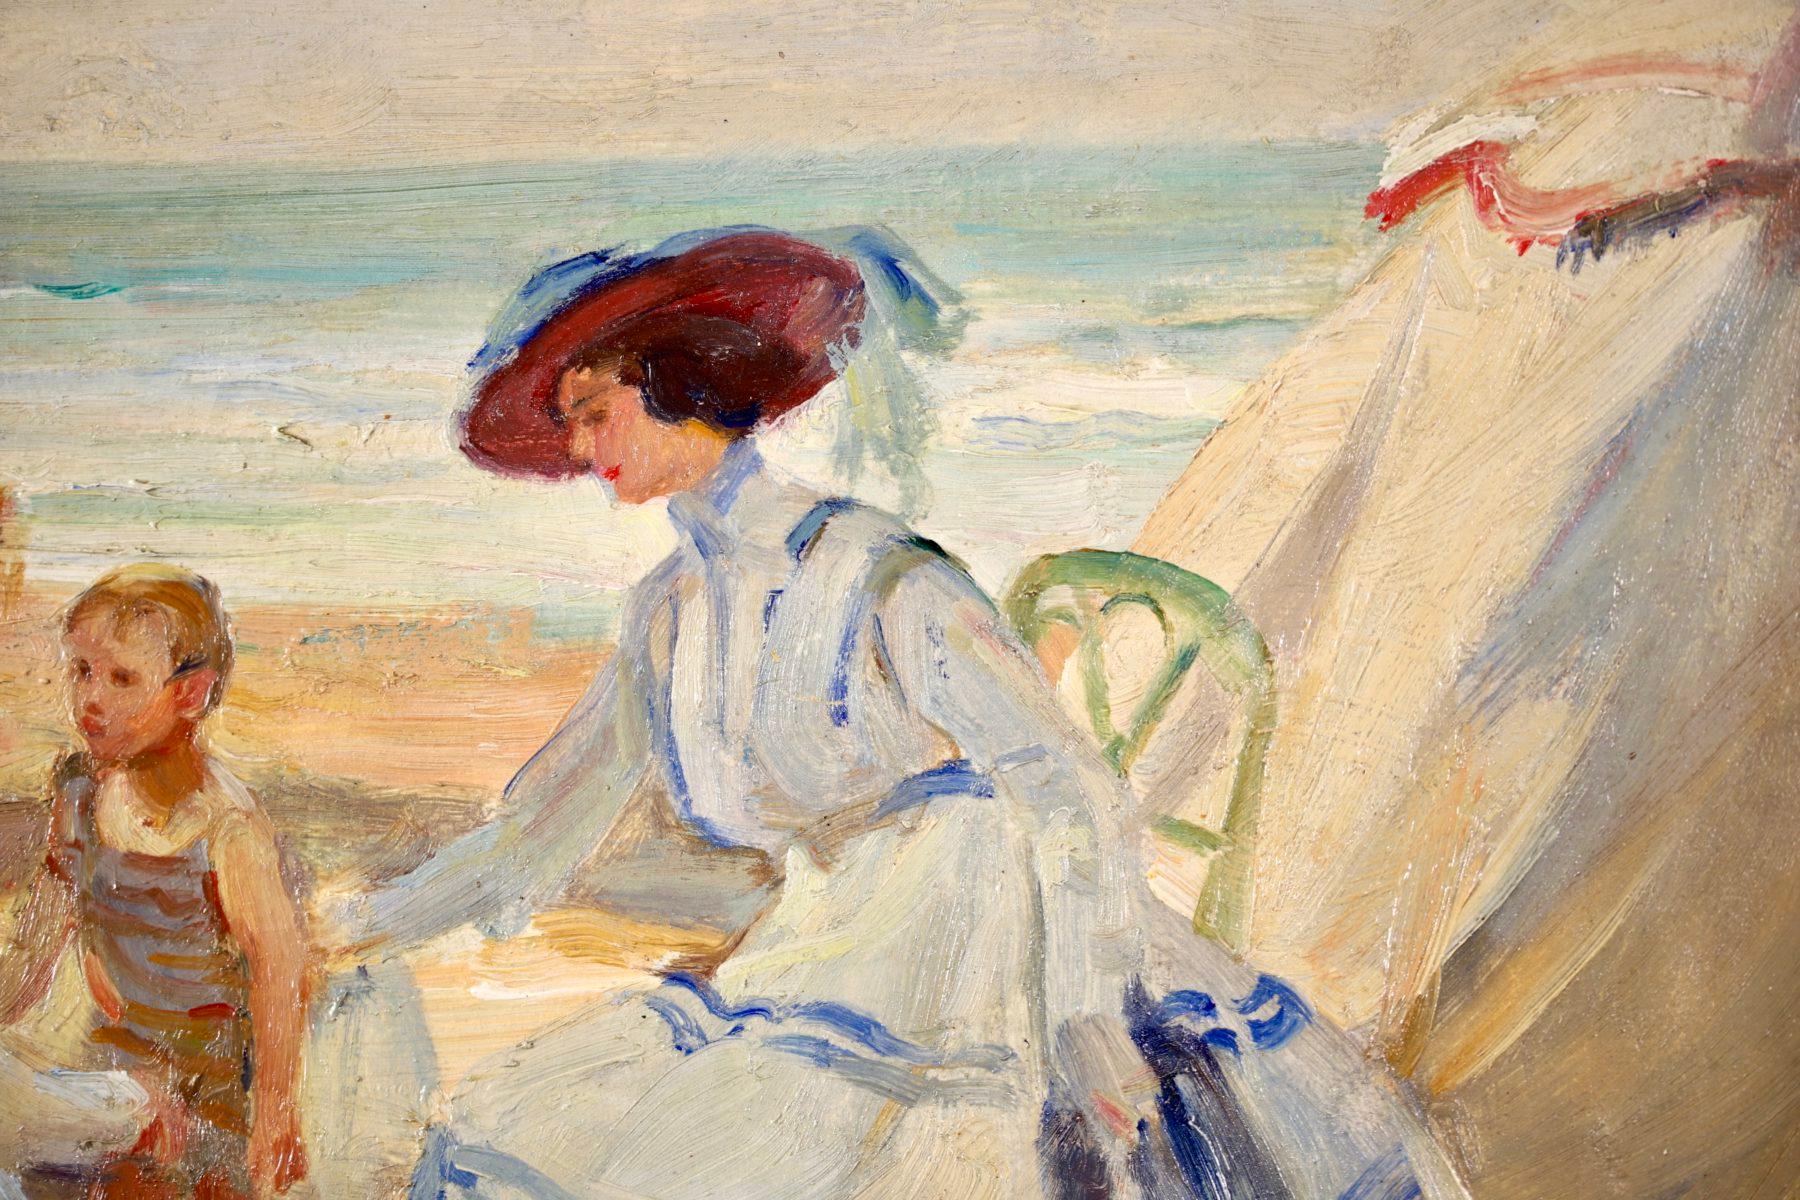 At the Beach - Post Impressionist Oil, Figures in Landscape by Paul Michel Dupuy 2